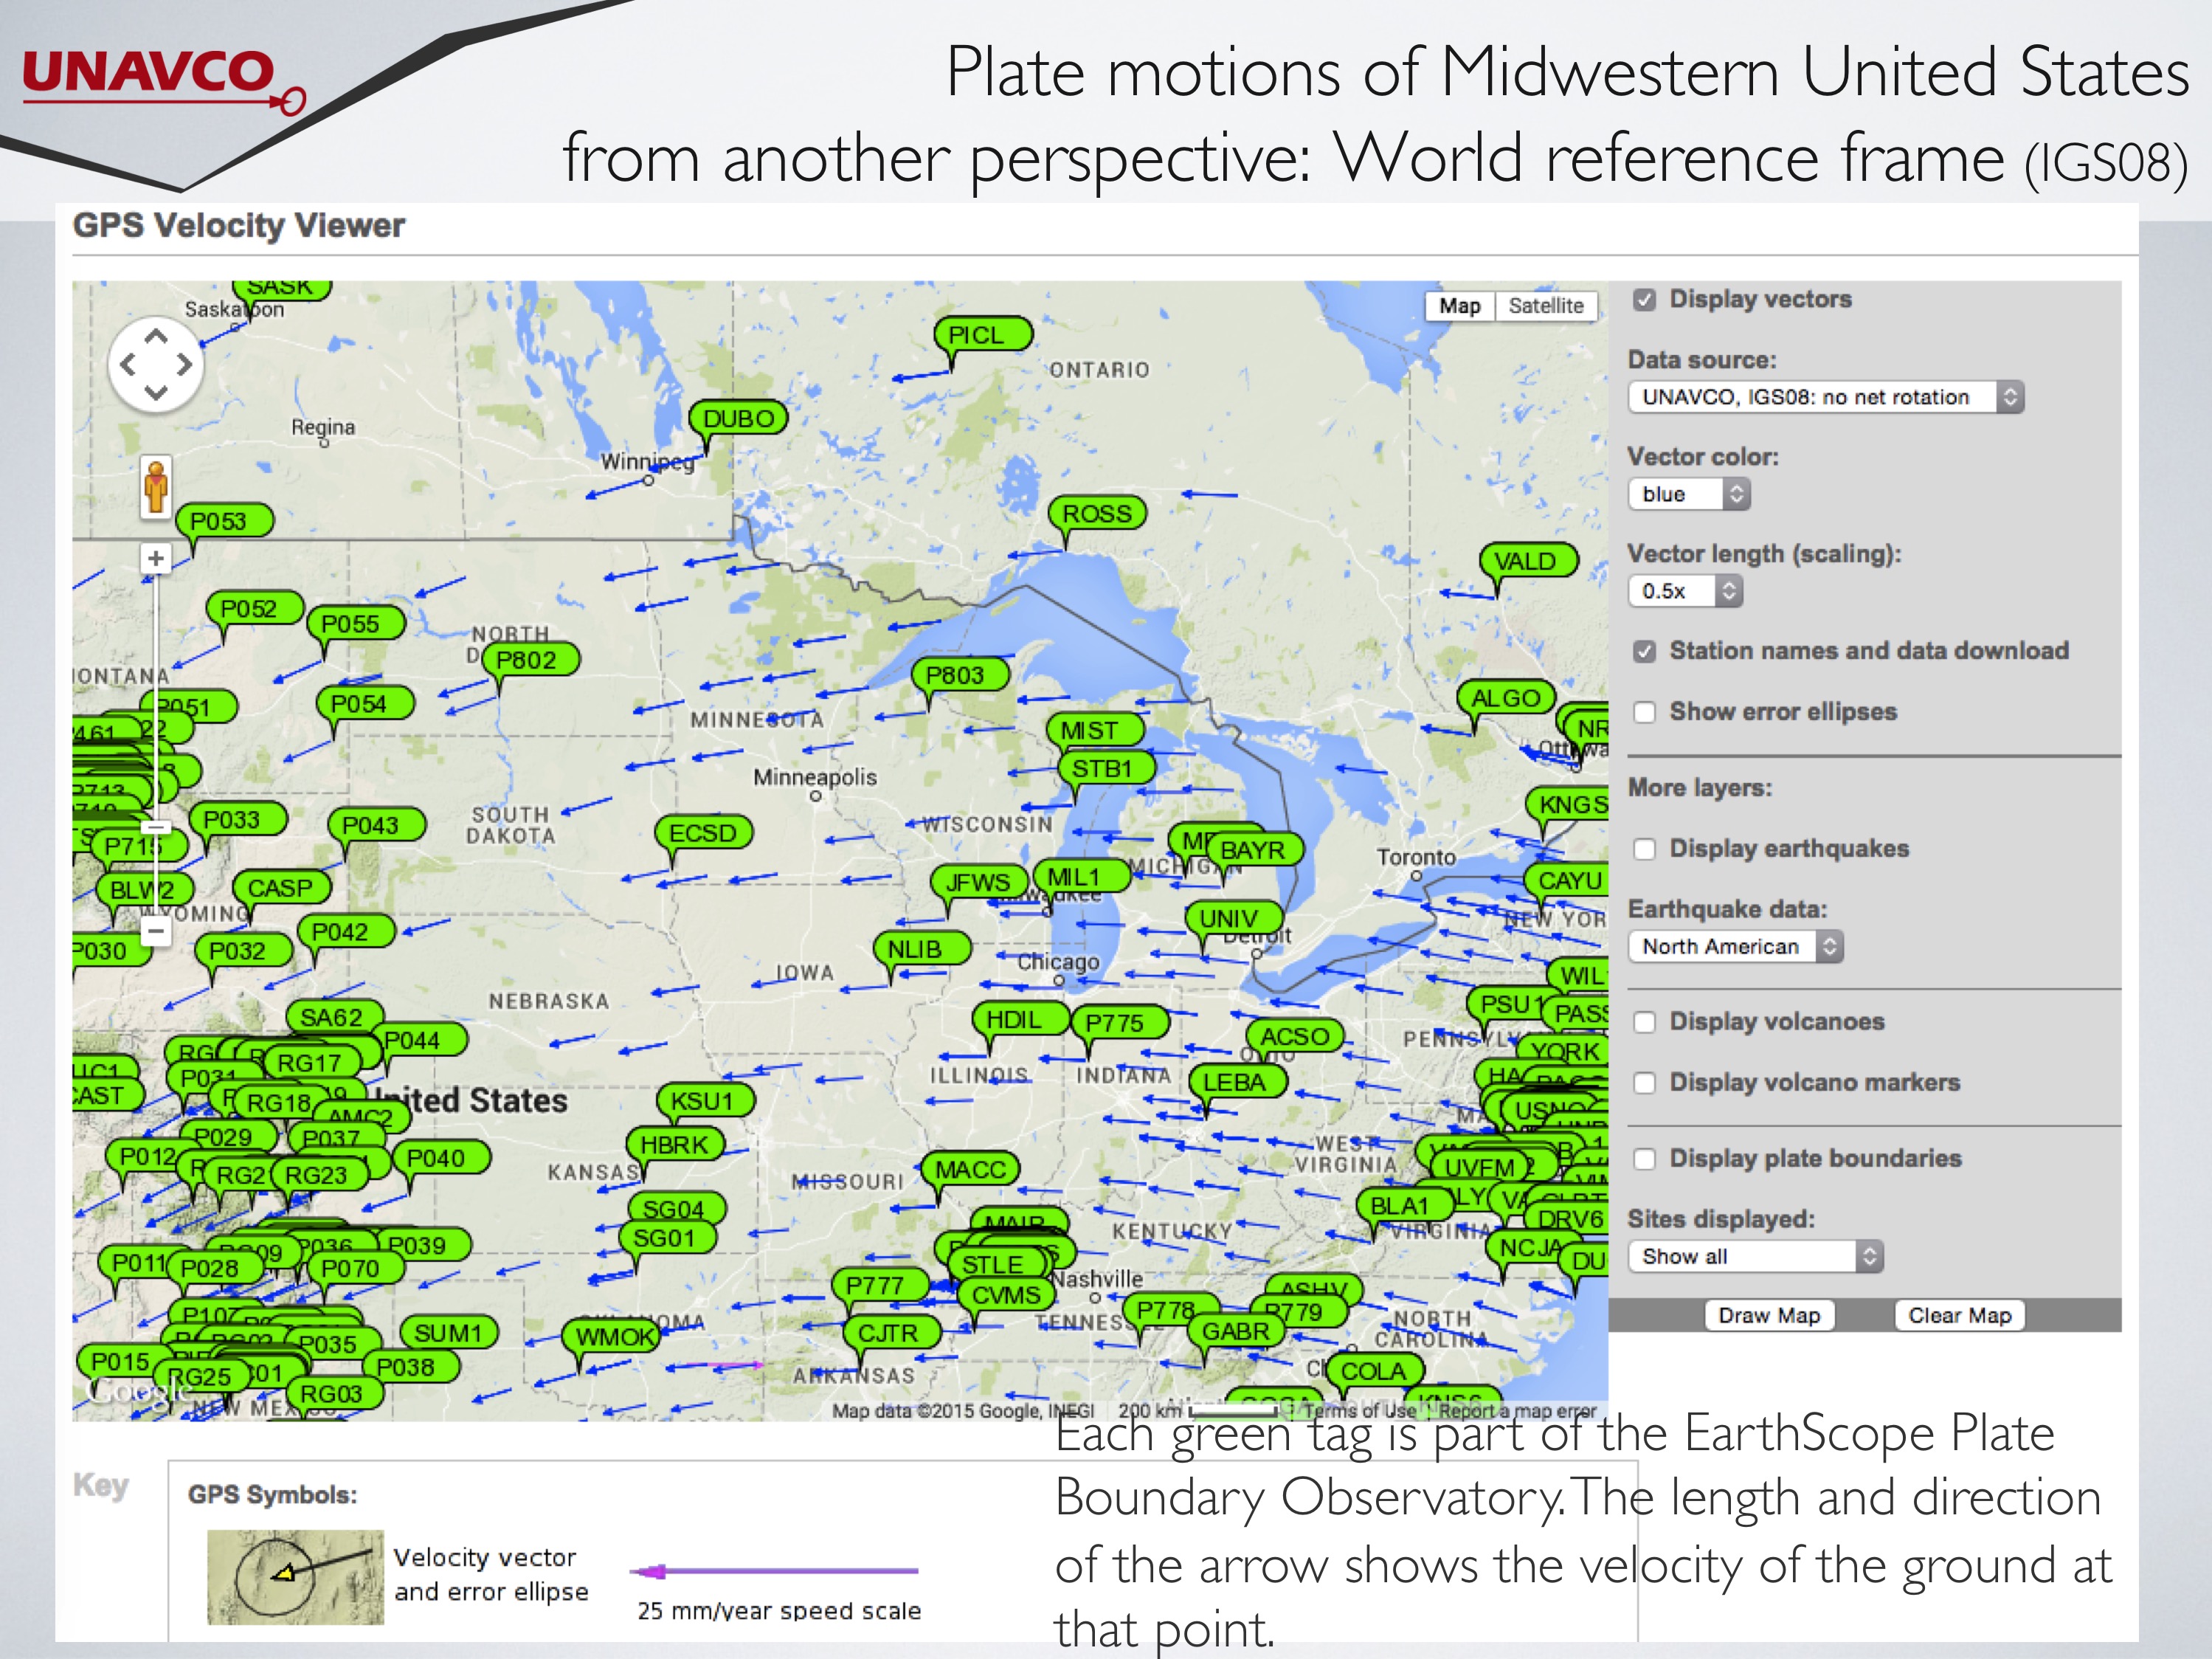 Map of the midwest United States showing plate motion using data from GPS sites of the EarthScope Plate Boundary Observatory and other networks